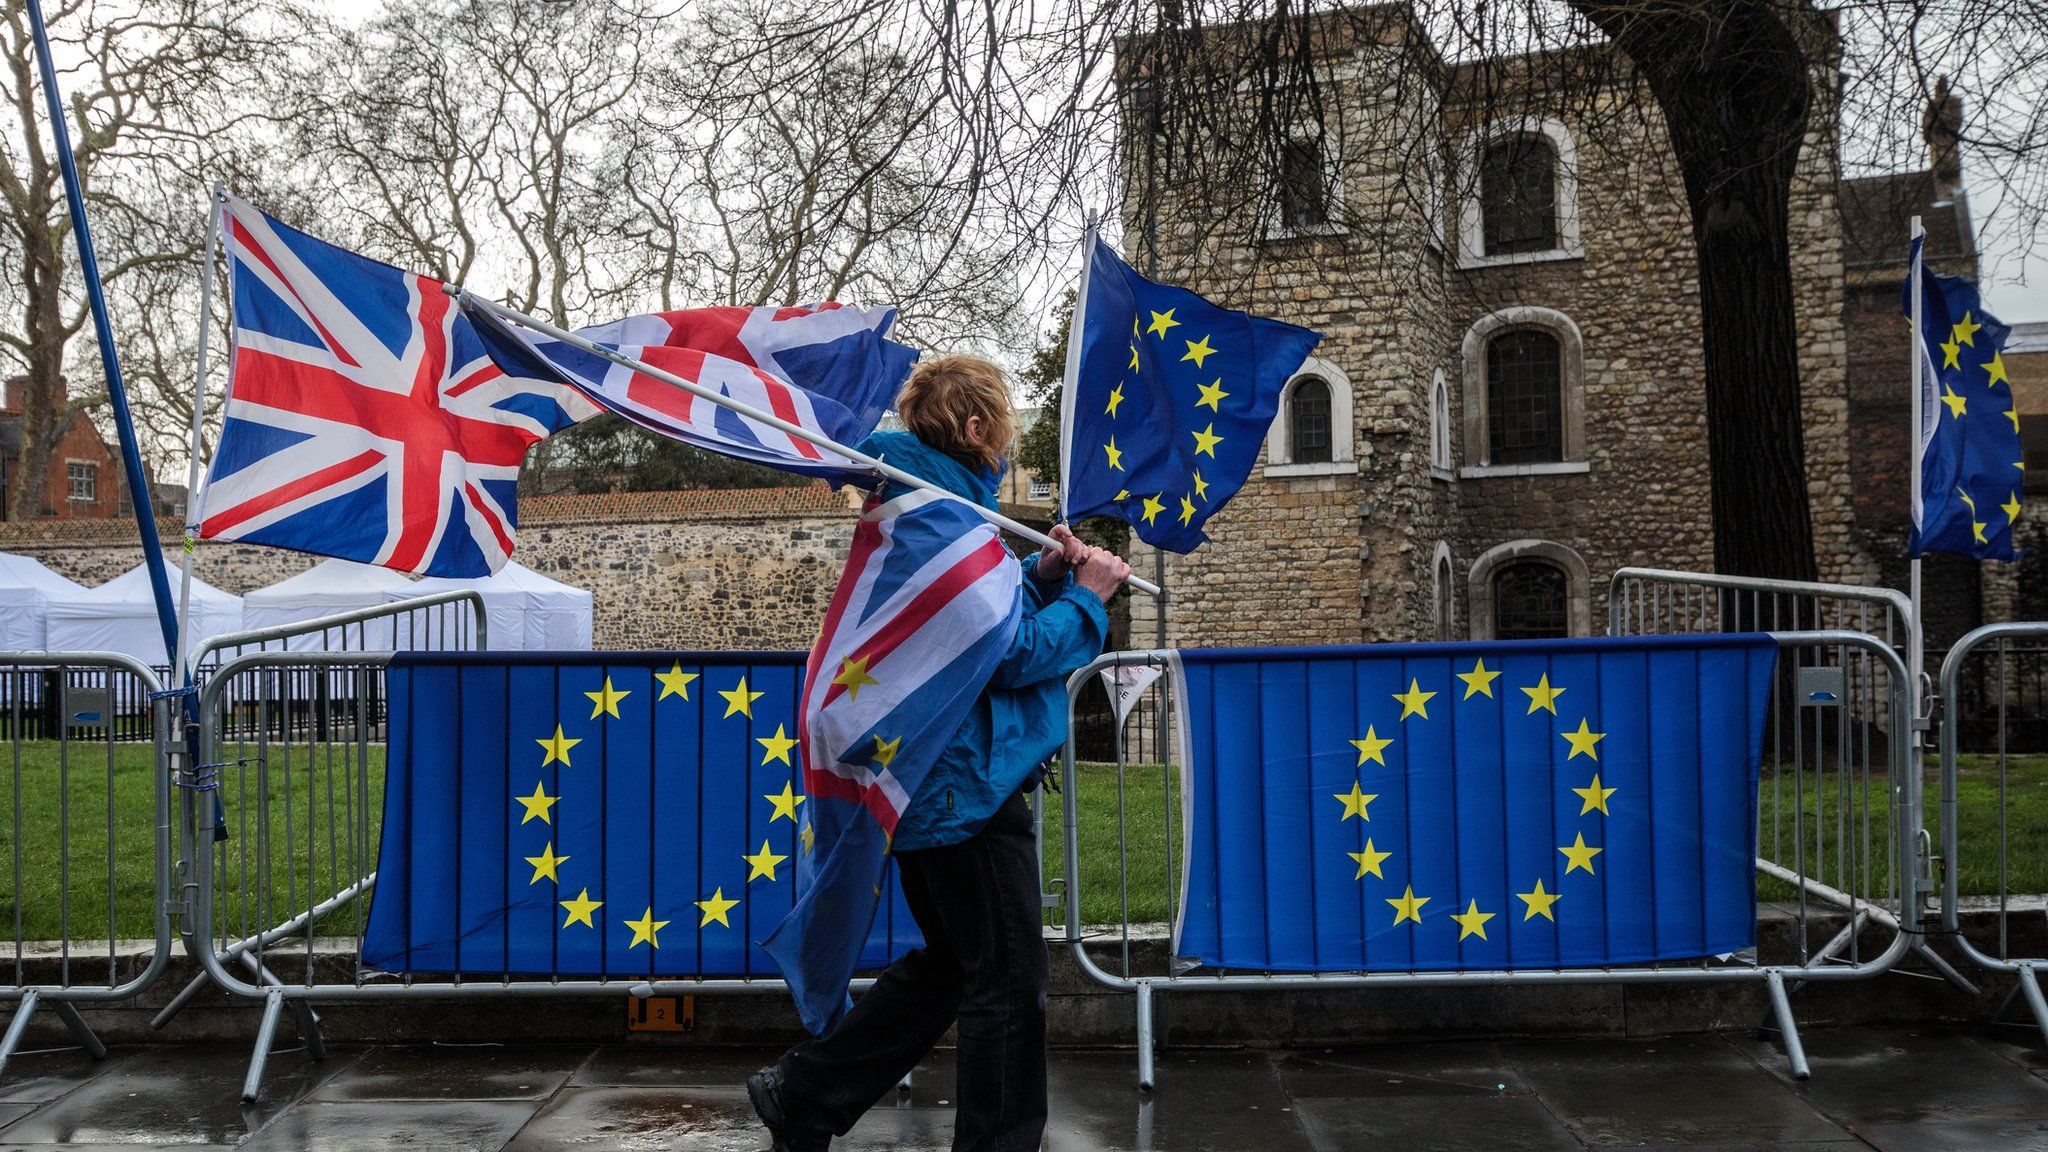 Anti-Brexit protesters demonstrate outside the Houses of Parliament on 18 March 2019 in London